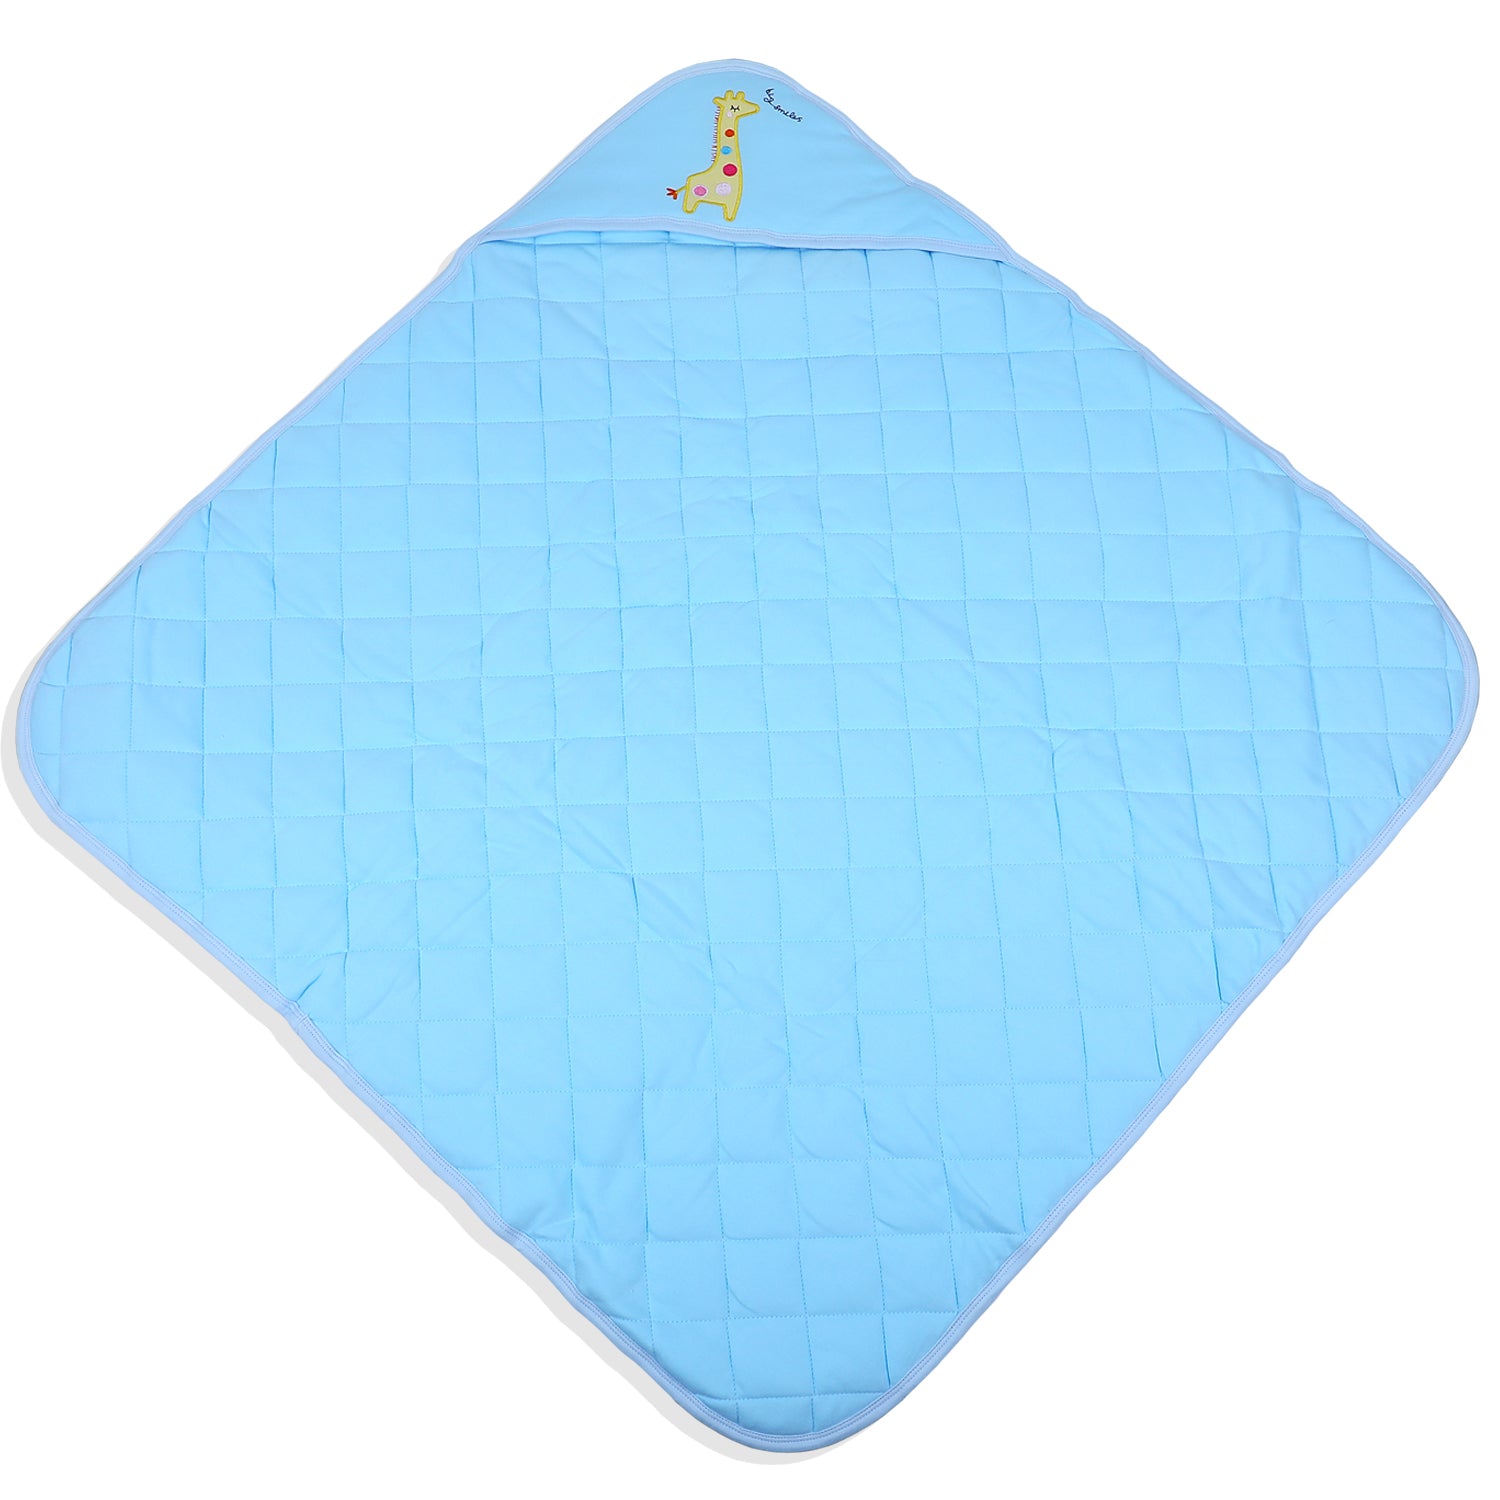 Baby Moo Giraffe Warm Hooded Quilted Wrapper - Blue